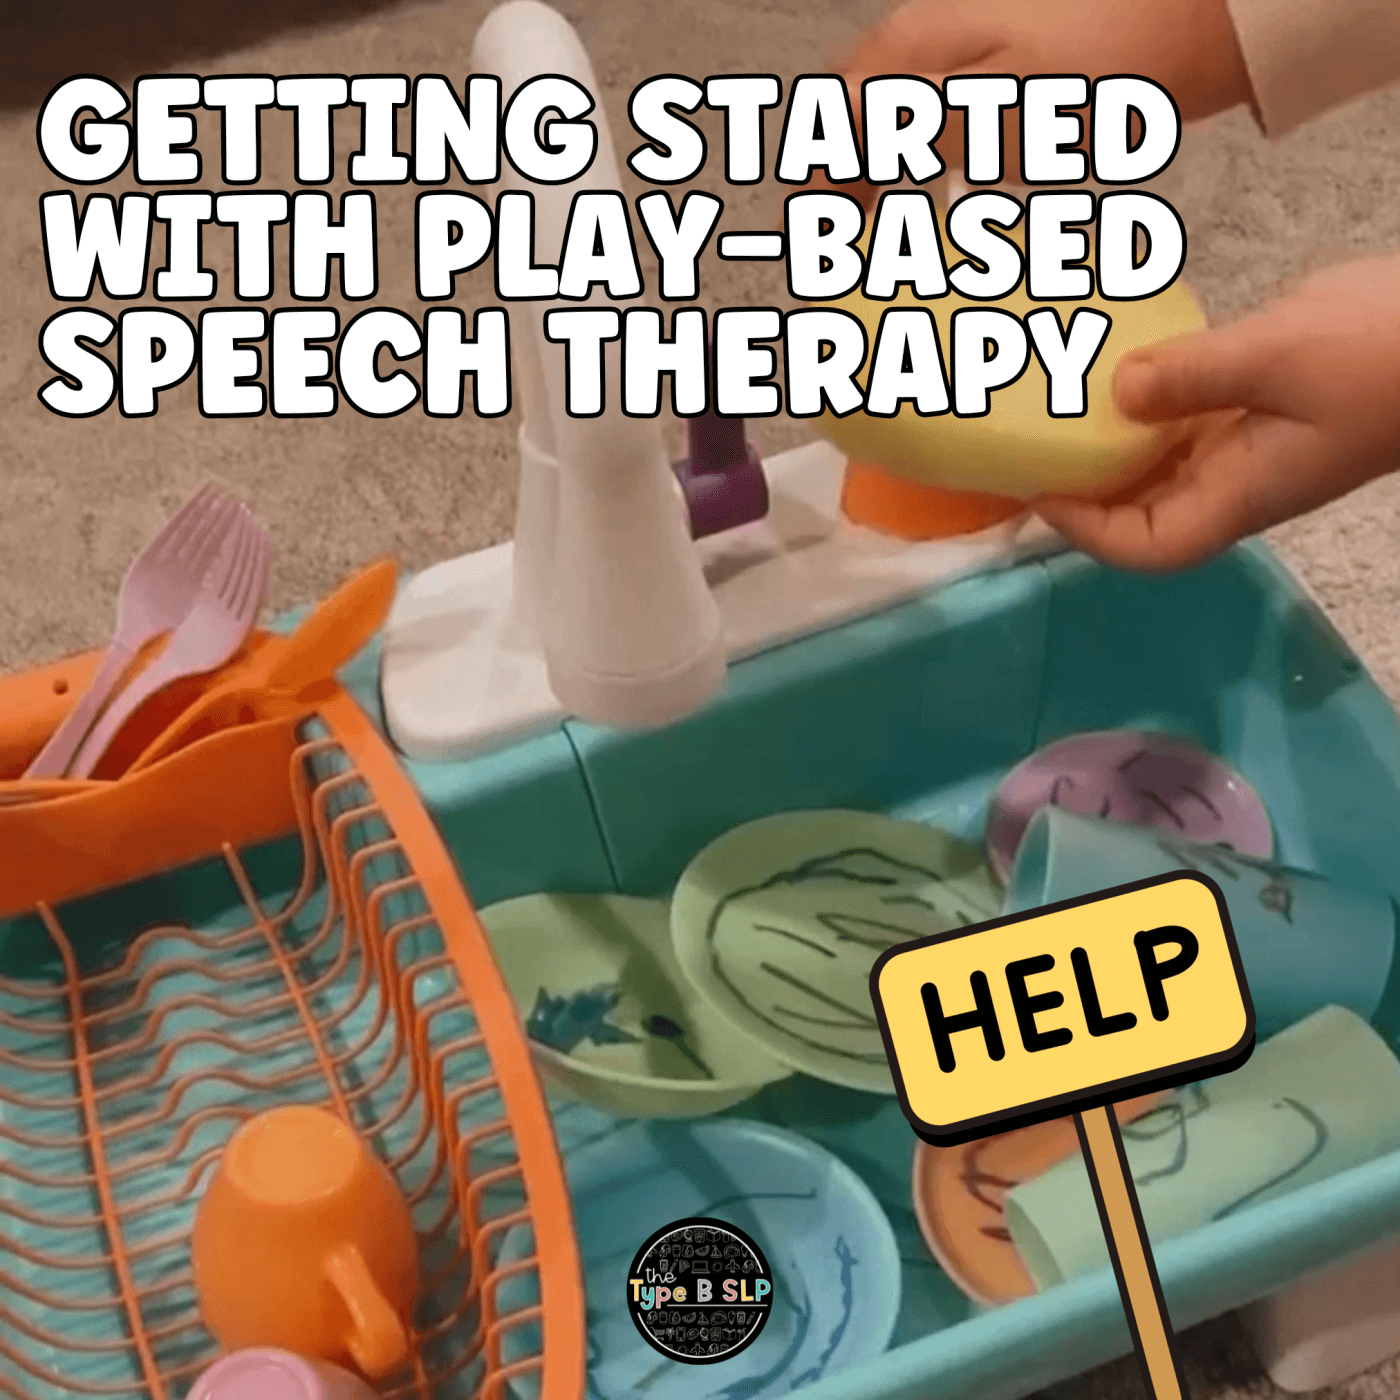 5 Tips for Getting Started with Play-Based Speech Therapy